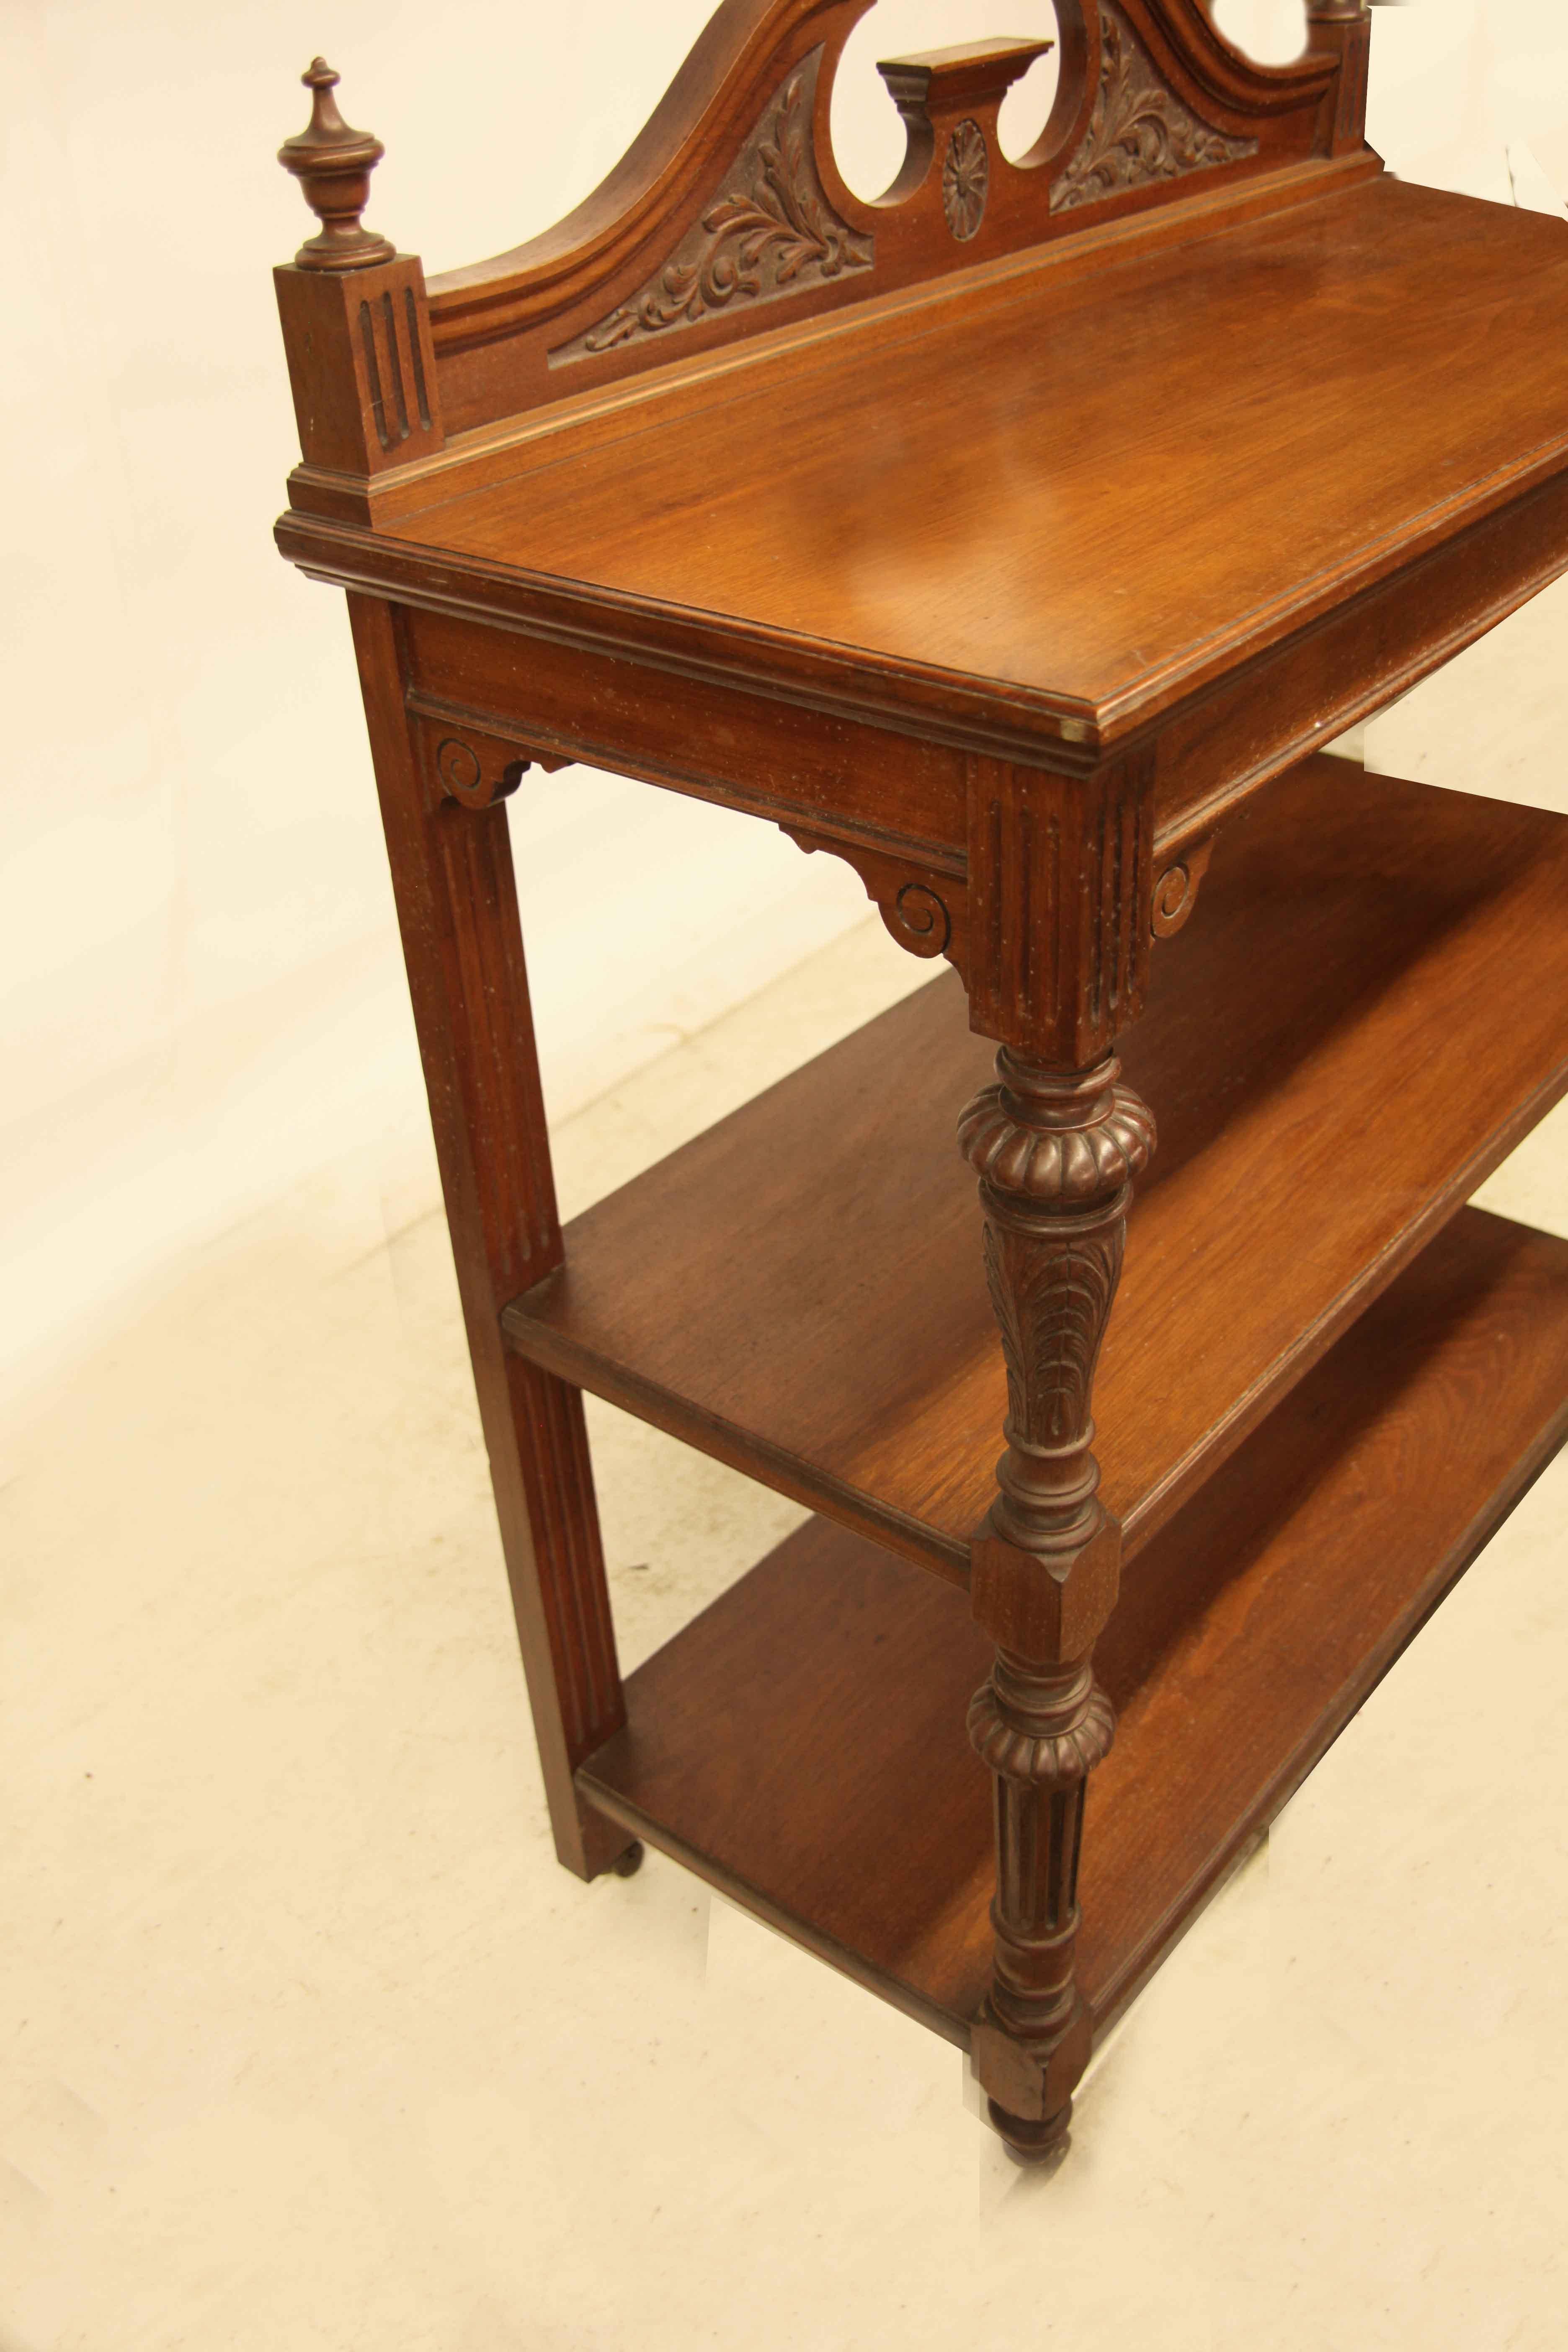 English carved walnut three tier server, the gallery along the back with carved foliate in the broken arch and carved oval medallion in the center, turned finials on each end. The three tiers are supported in the front by intricately carved baluster